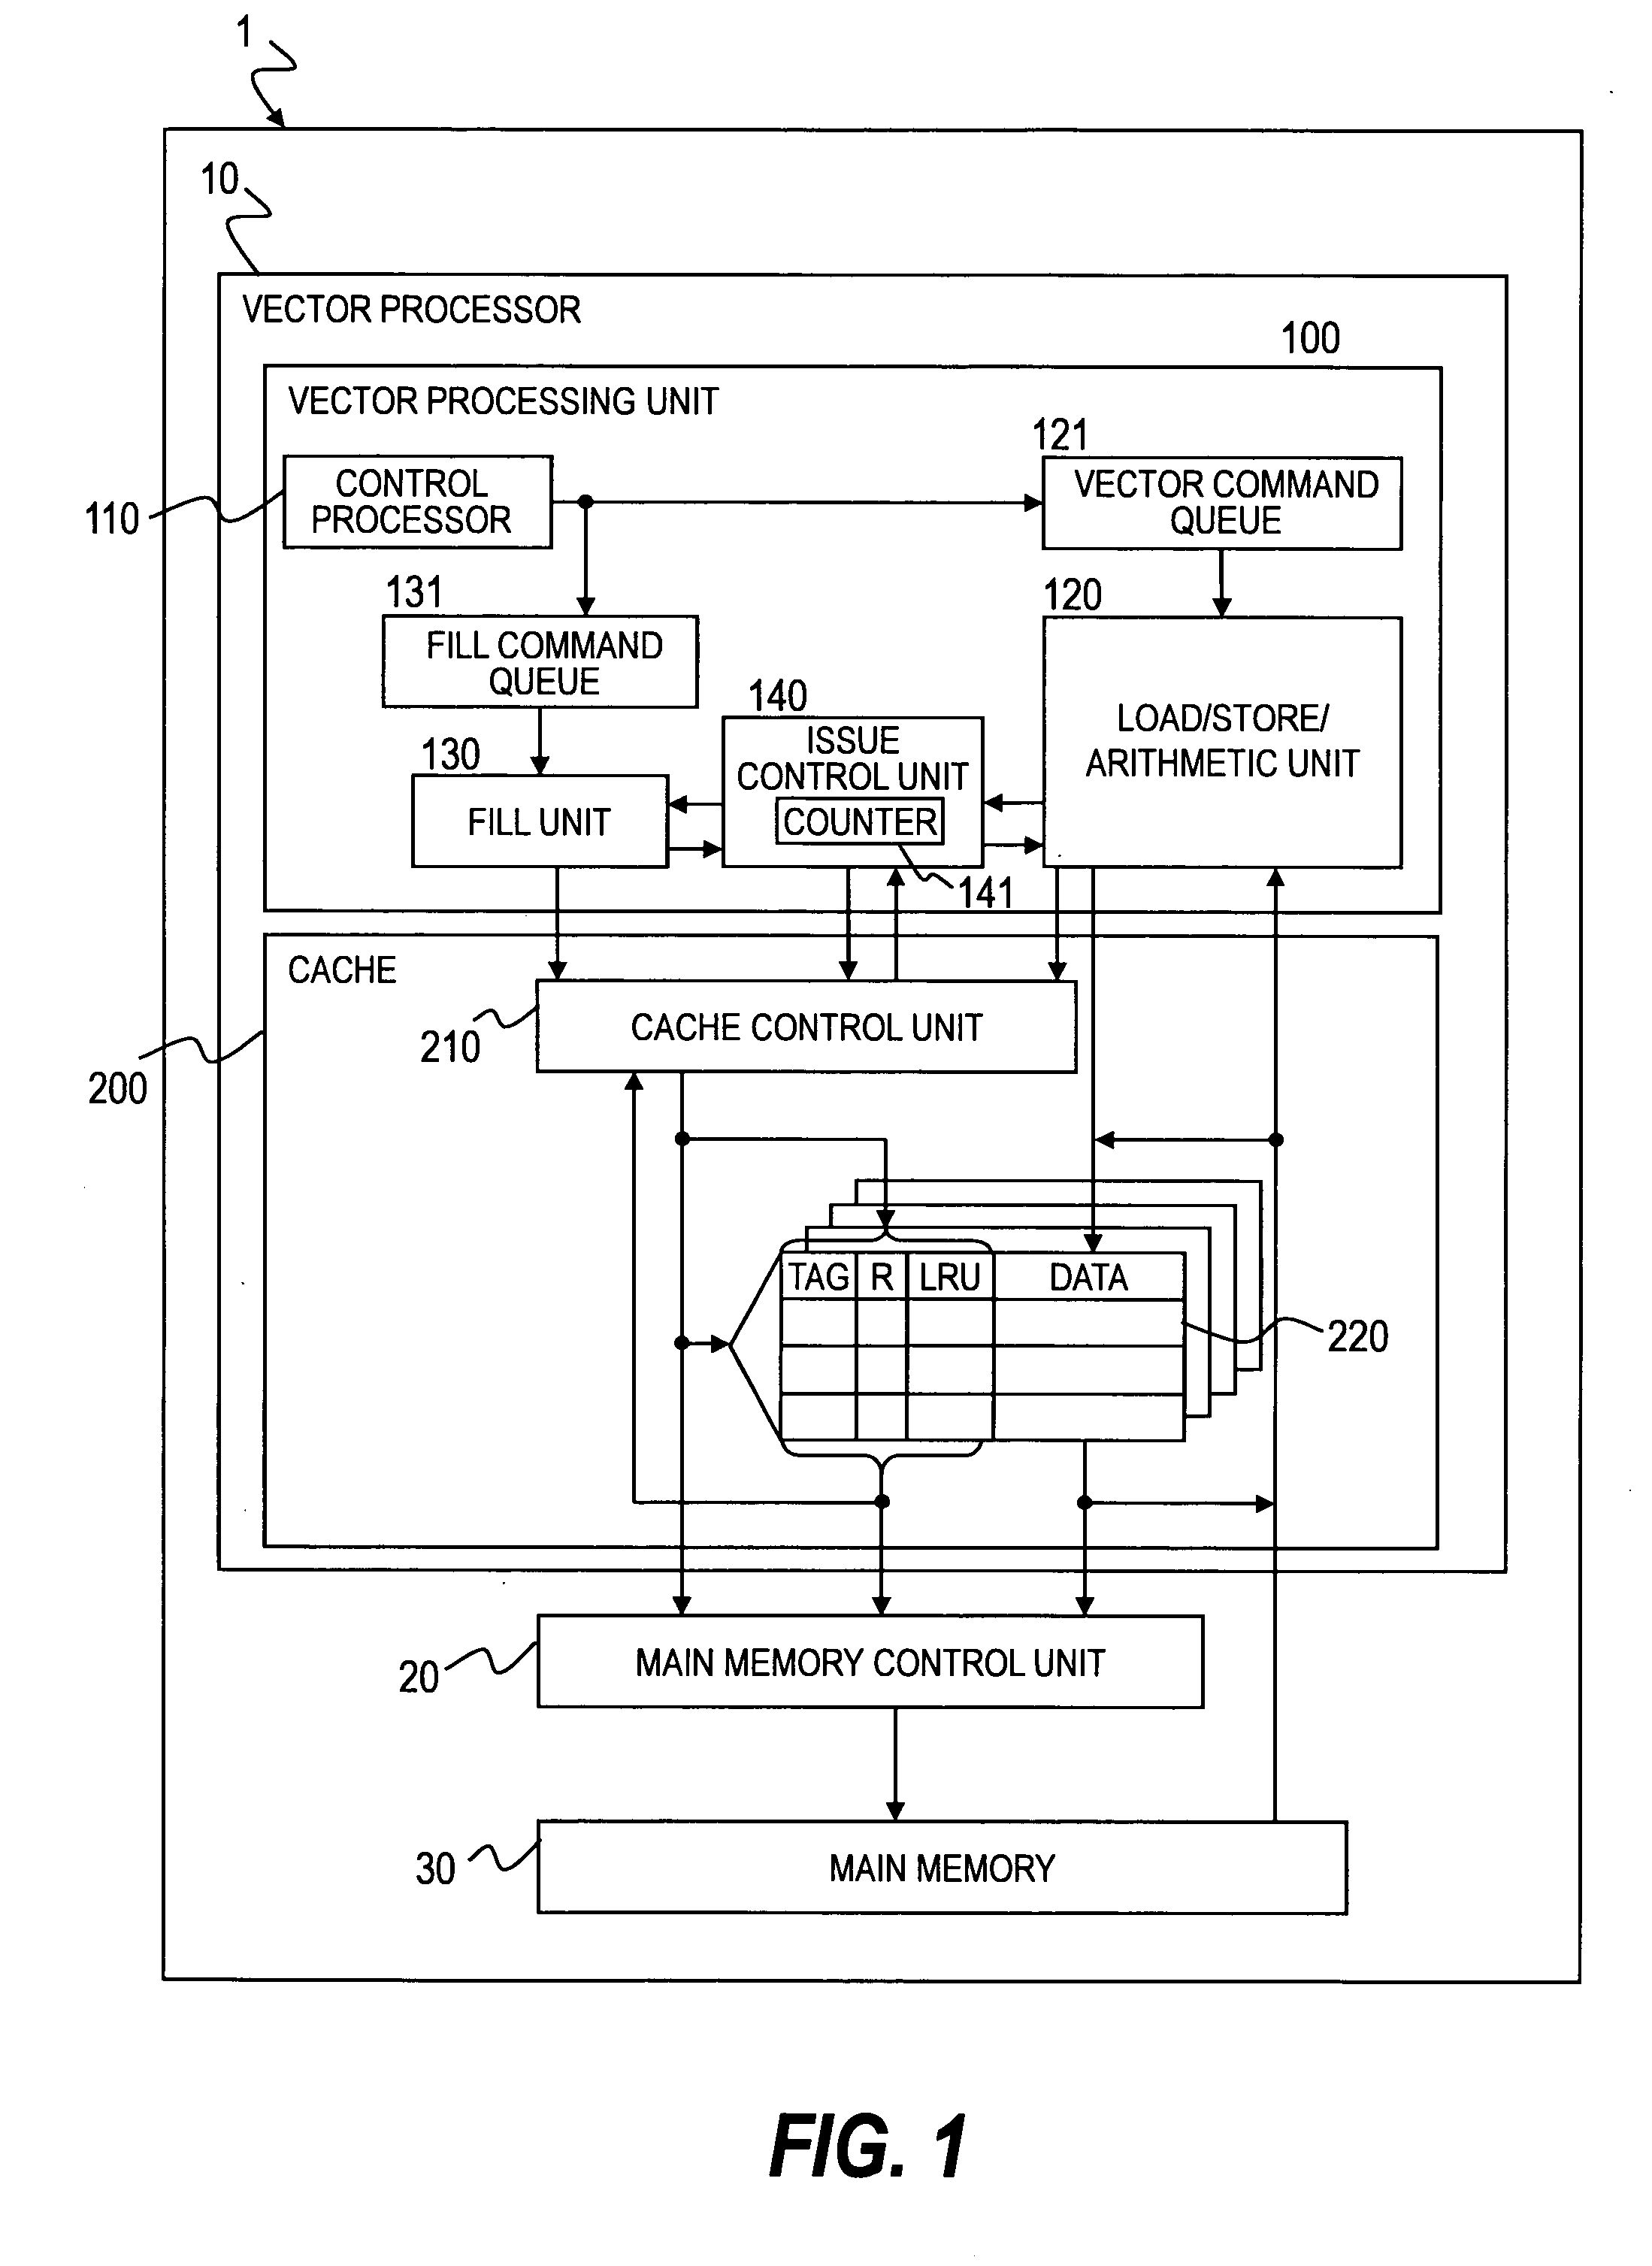 Processor with prefetch function